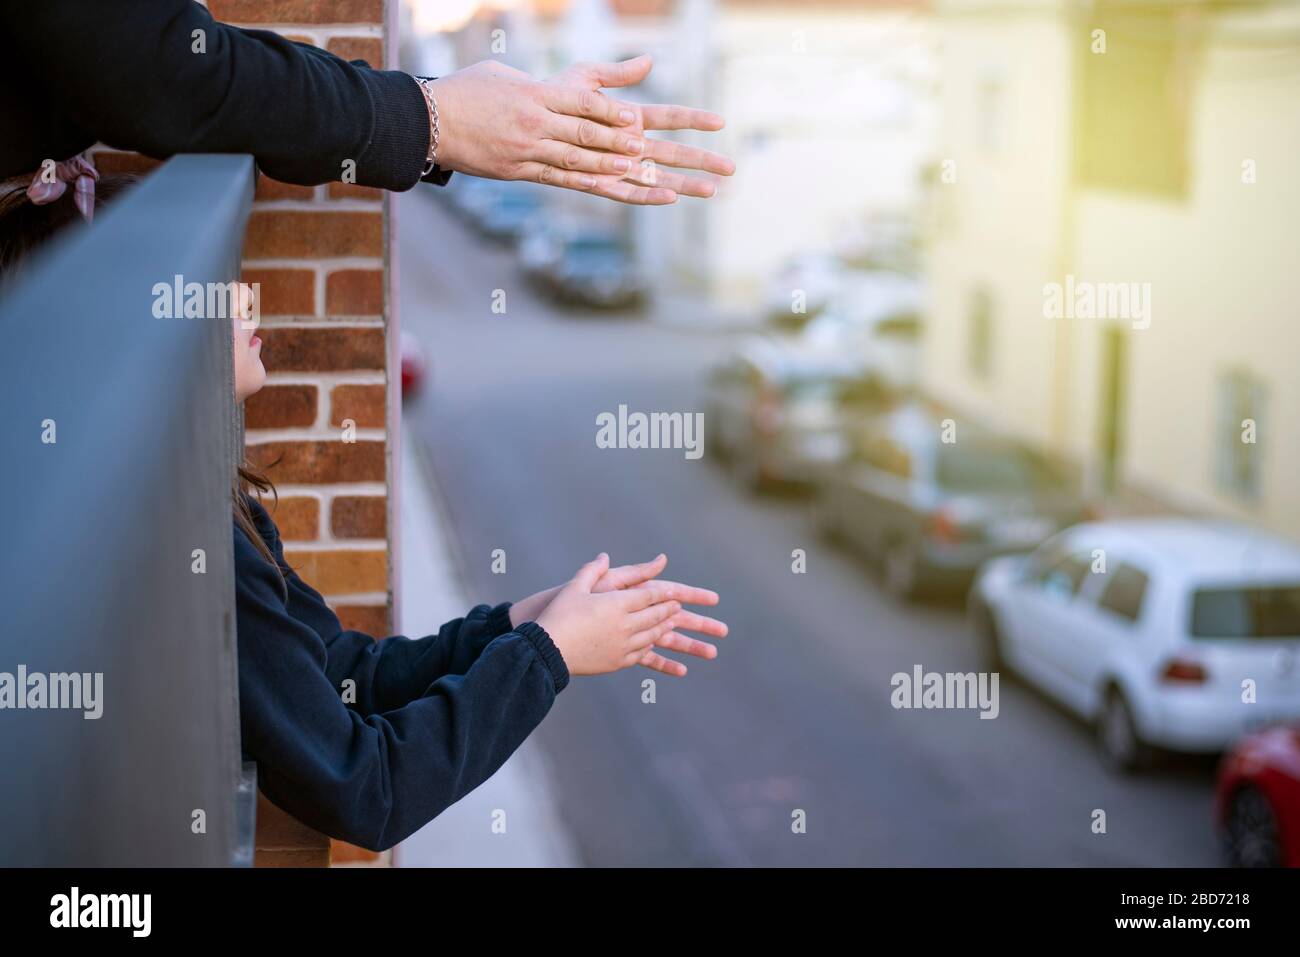 hands clapping on a balcony overlooking a street with the lights on Stock Photo